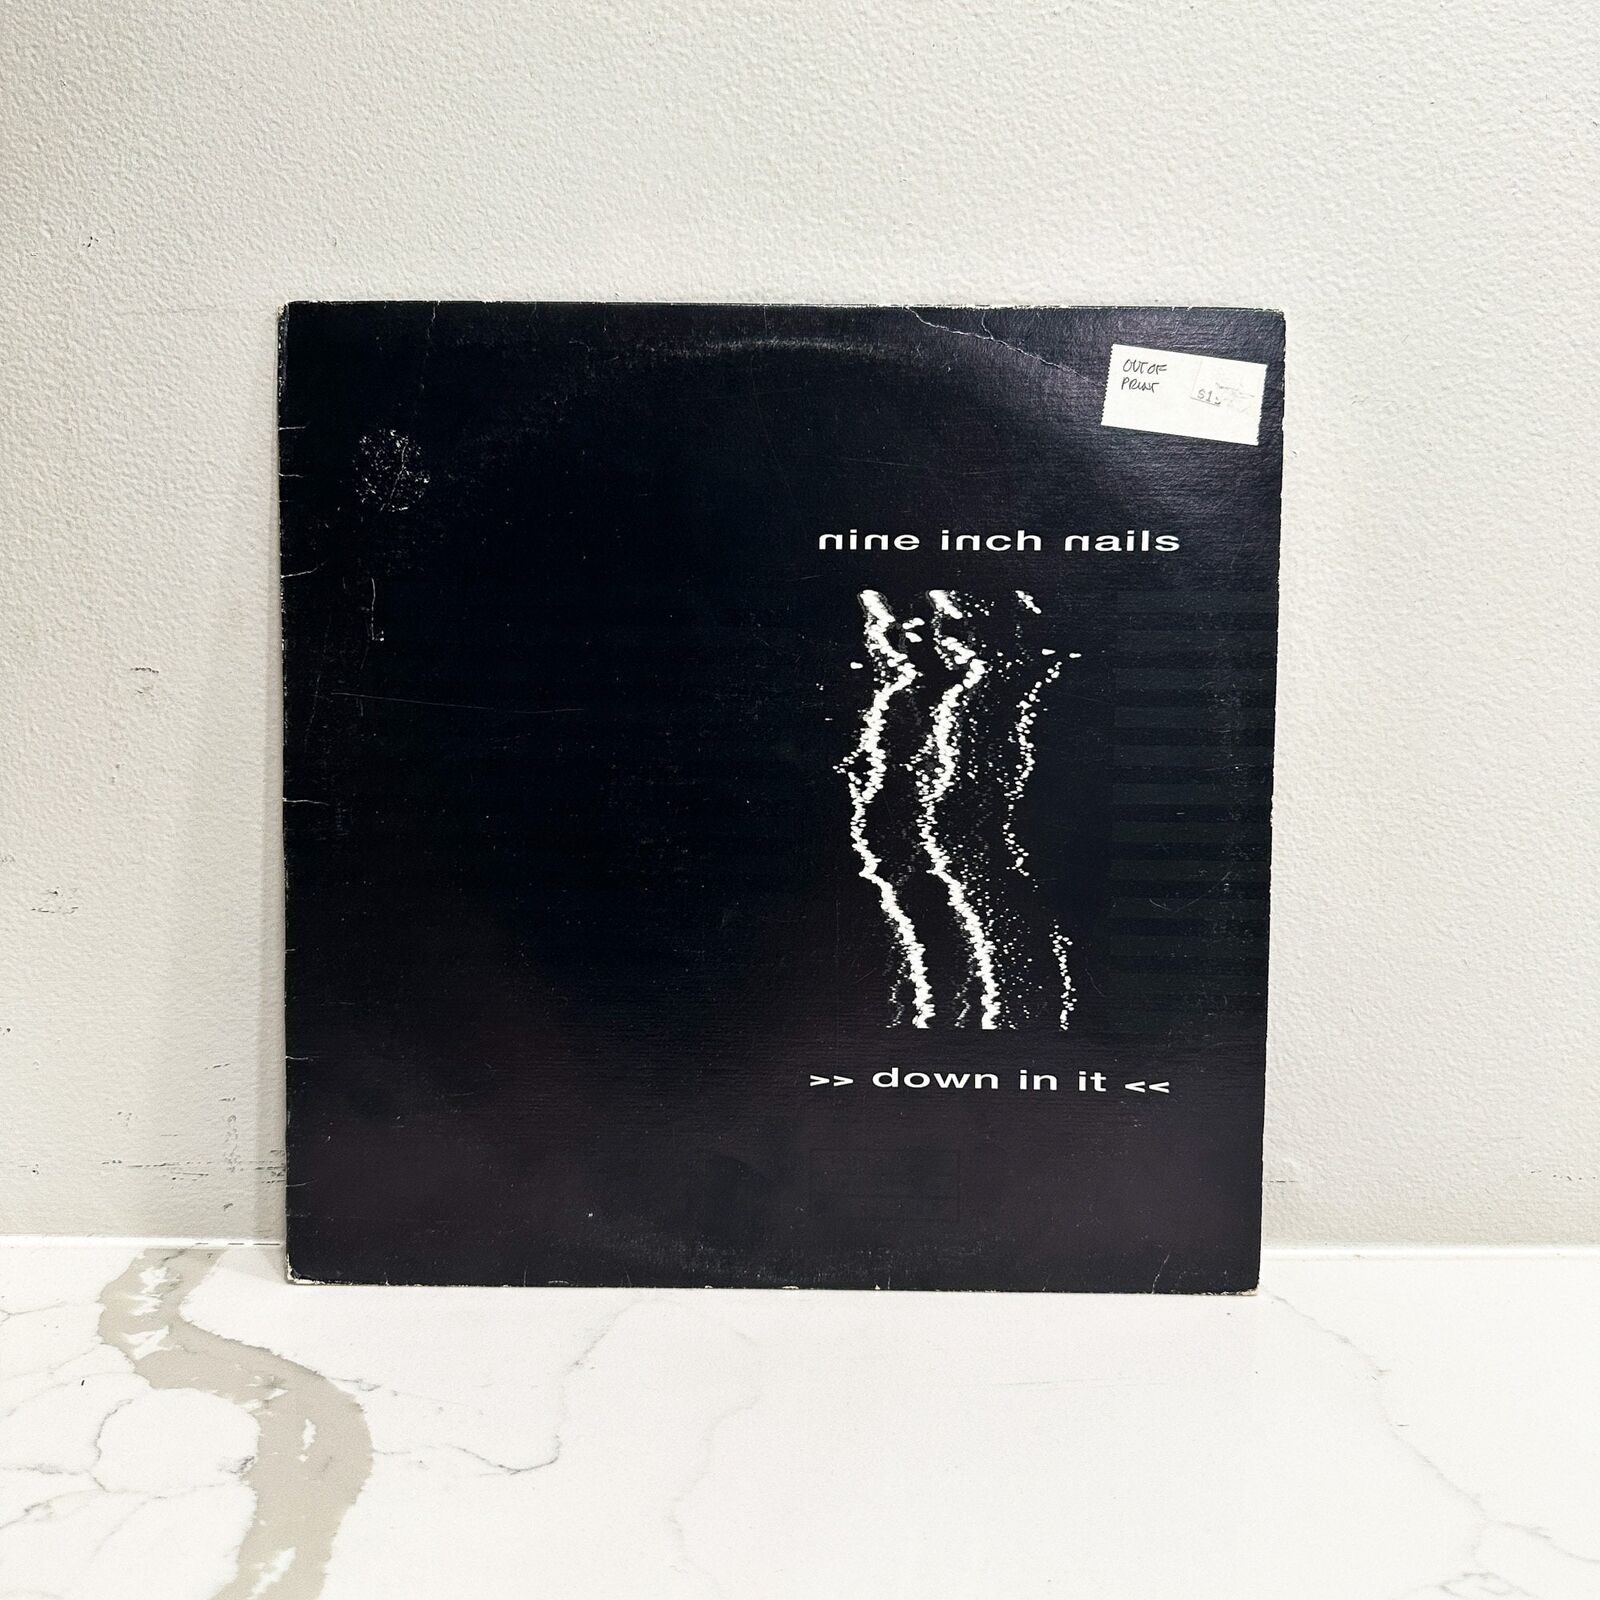 Nine Inch Nails – Down In It - Vinyl LP Record - 1989